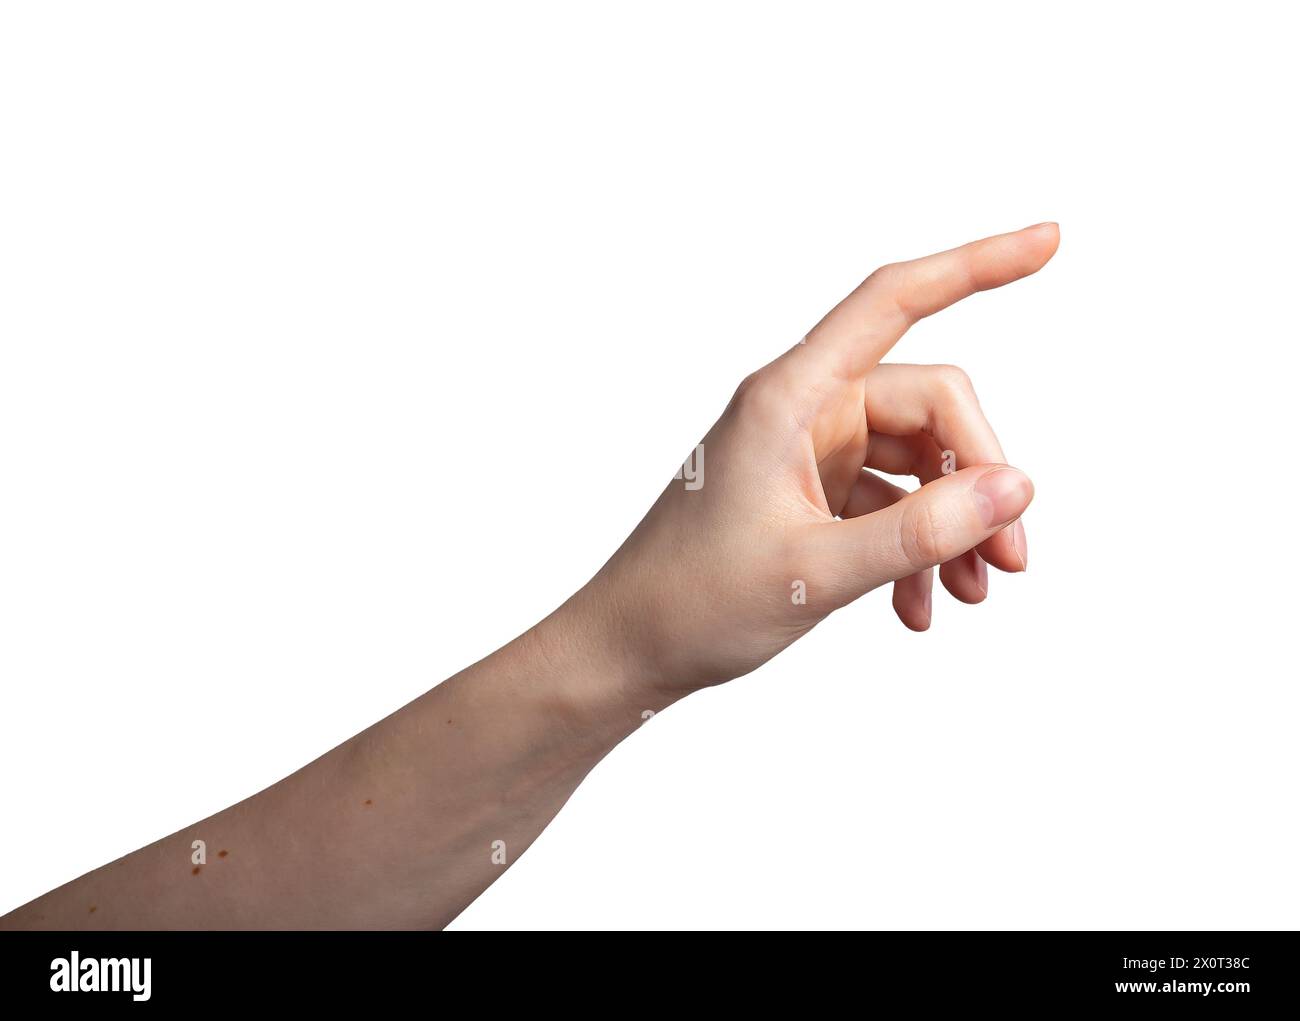 Hand clicking, index finger touching, tapping, gesturing, pointing aside, isolated on white background. Stock Photo